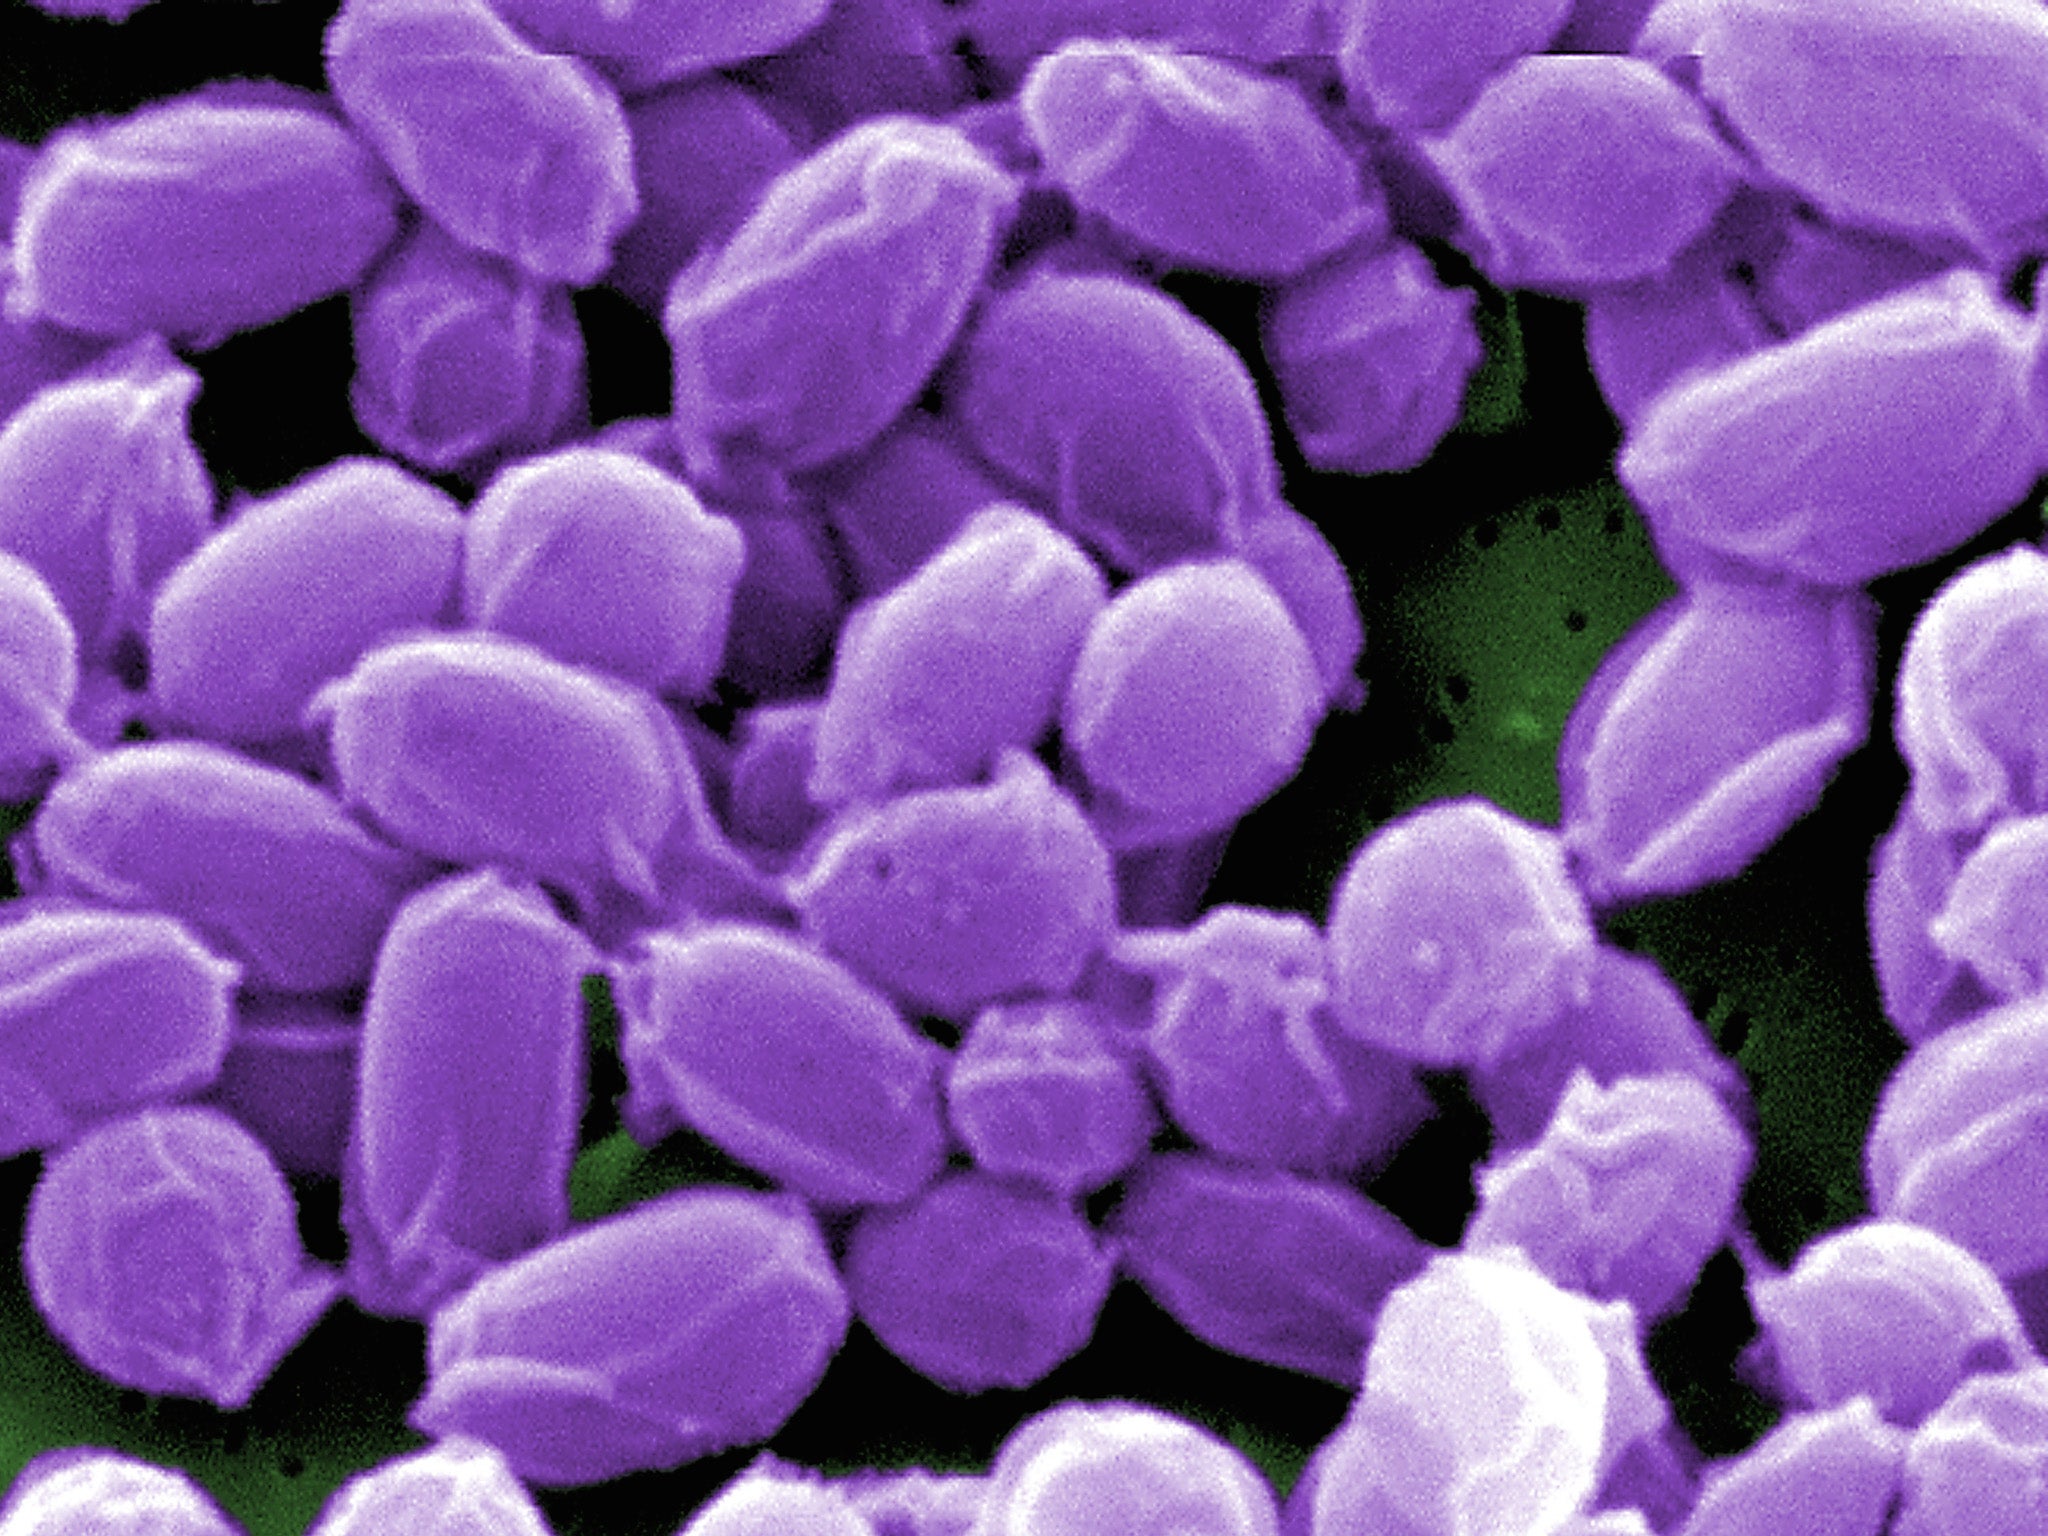 The US has admitted anthrax spores were sent to Britain as well